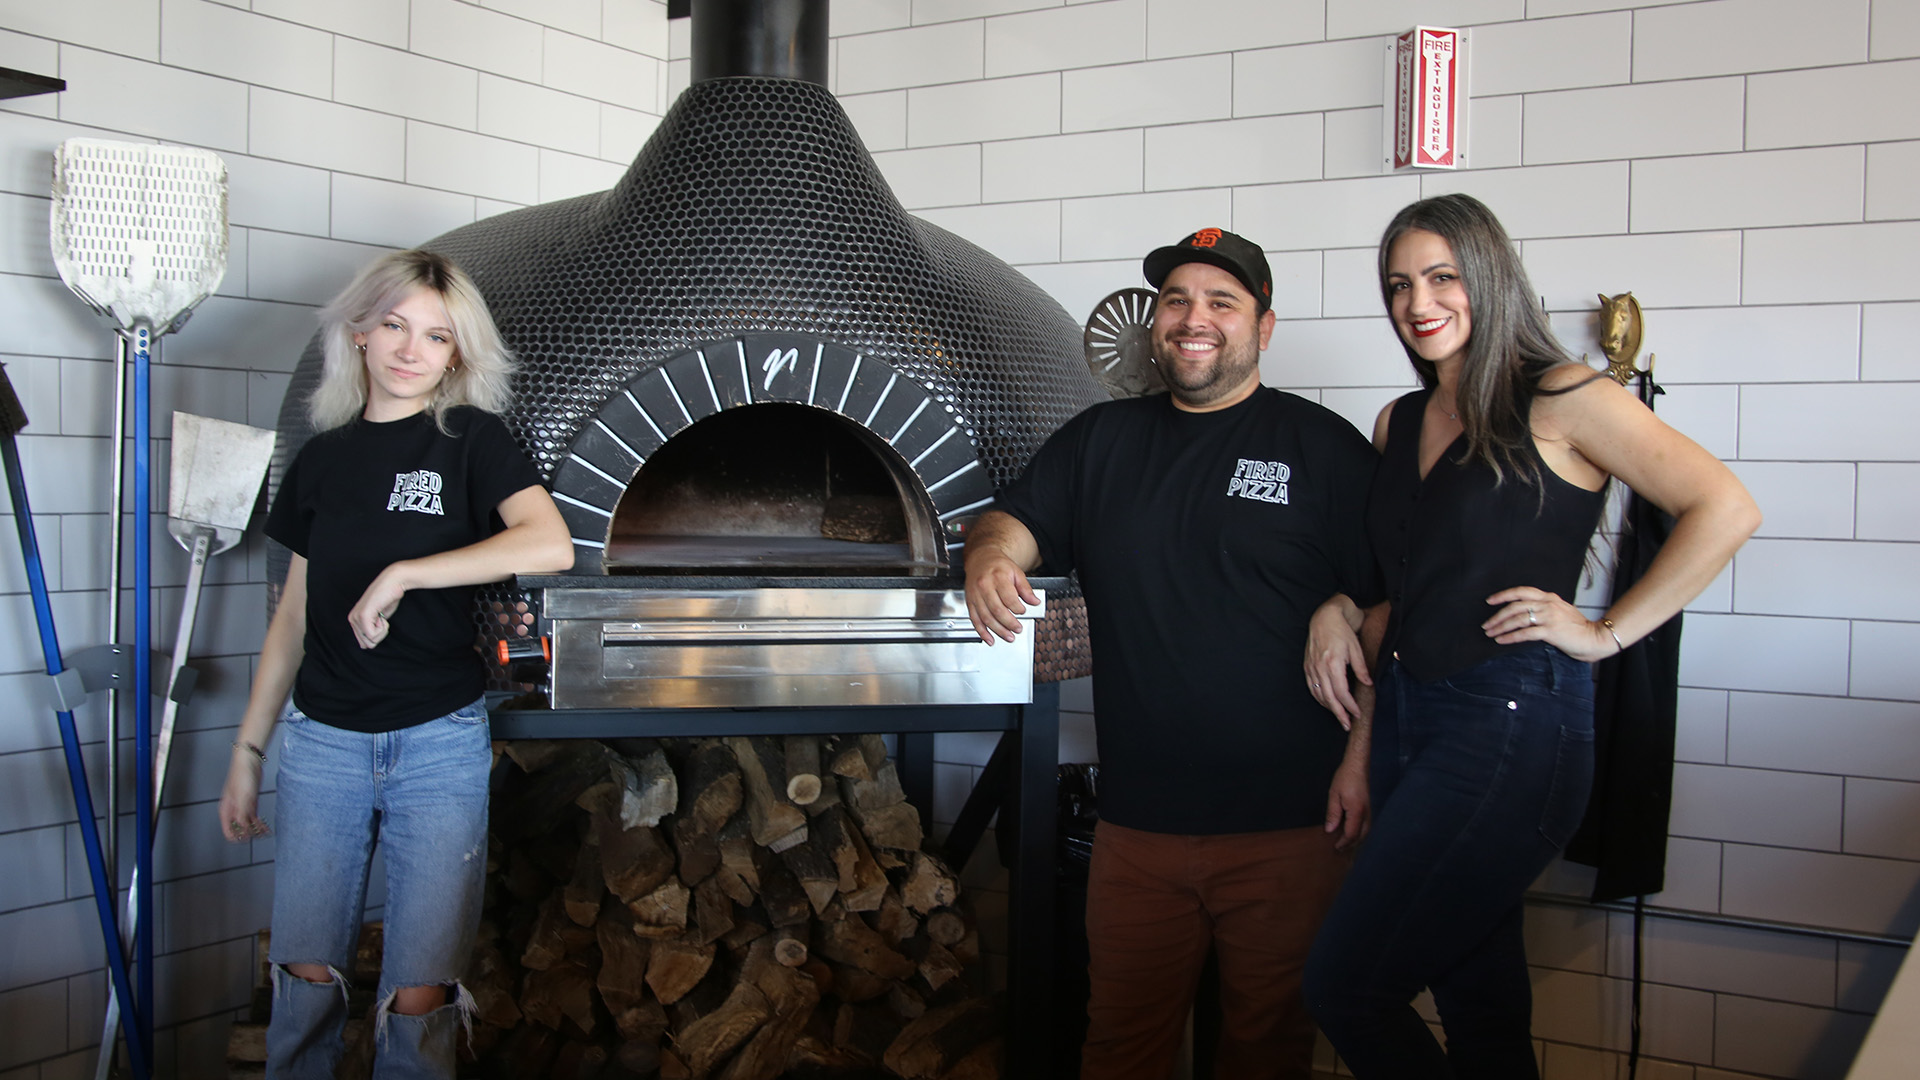 Fired Pizza Team with their Mugnaini Pizza Oven. An excellent oven for restaurants.